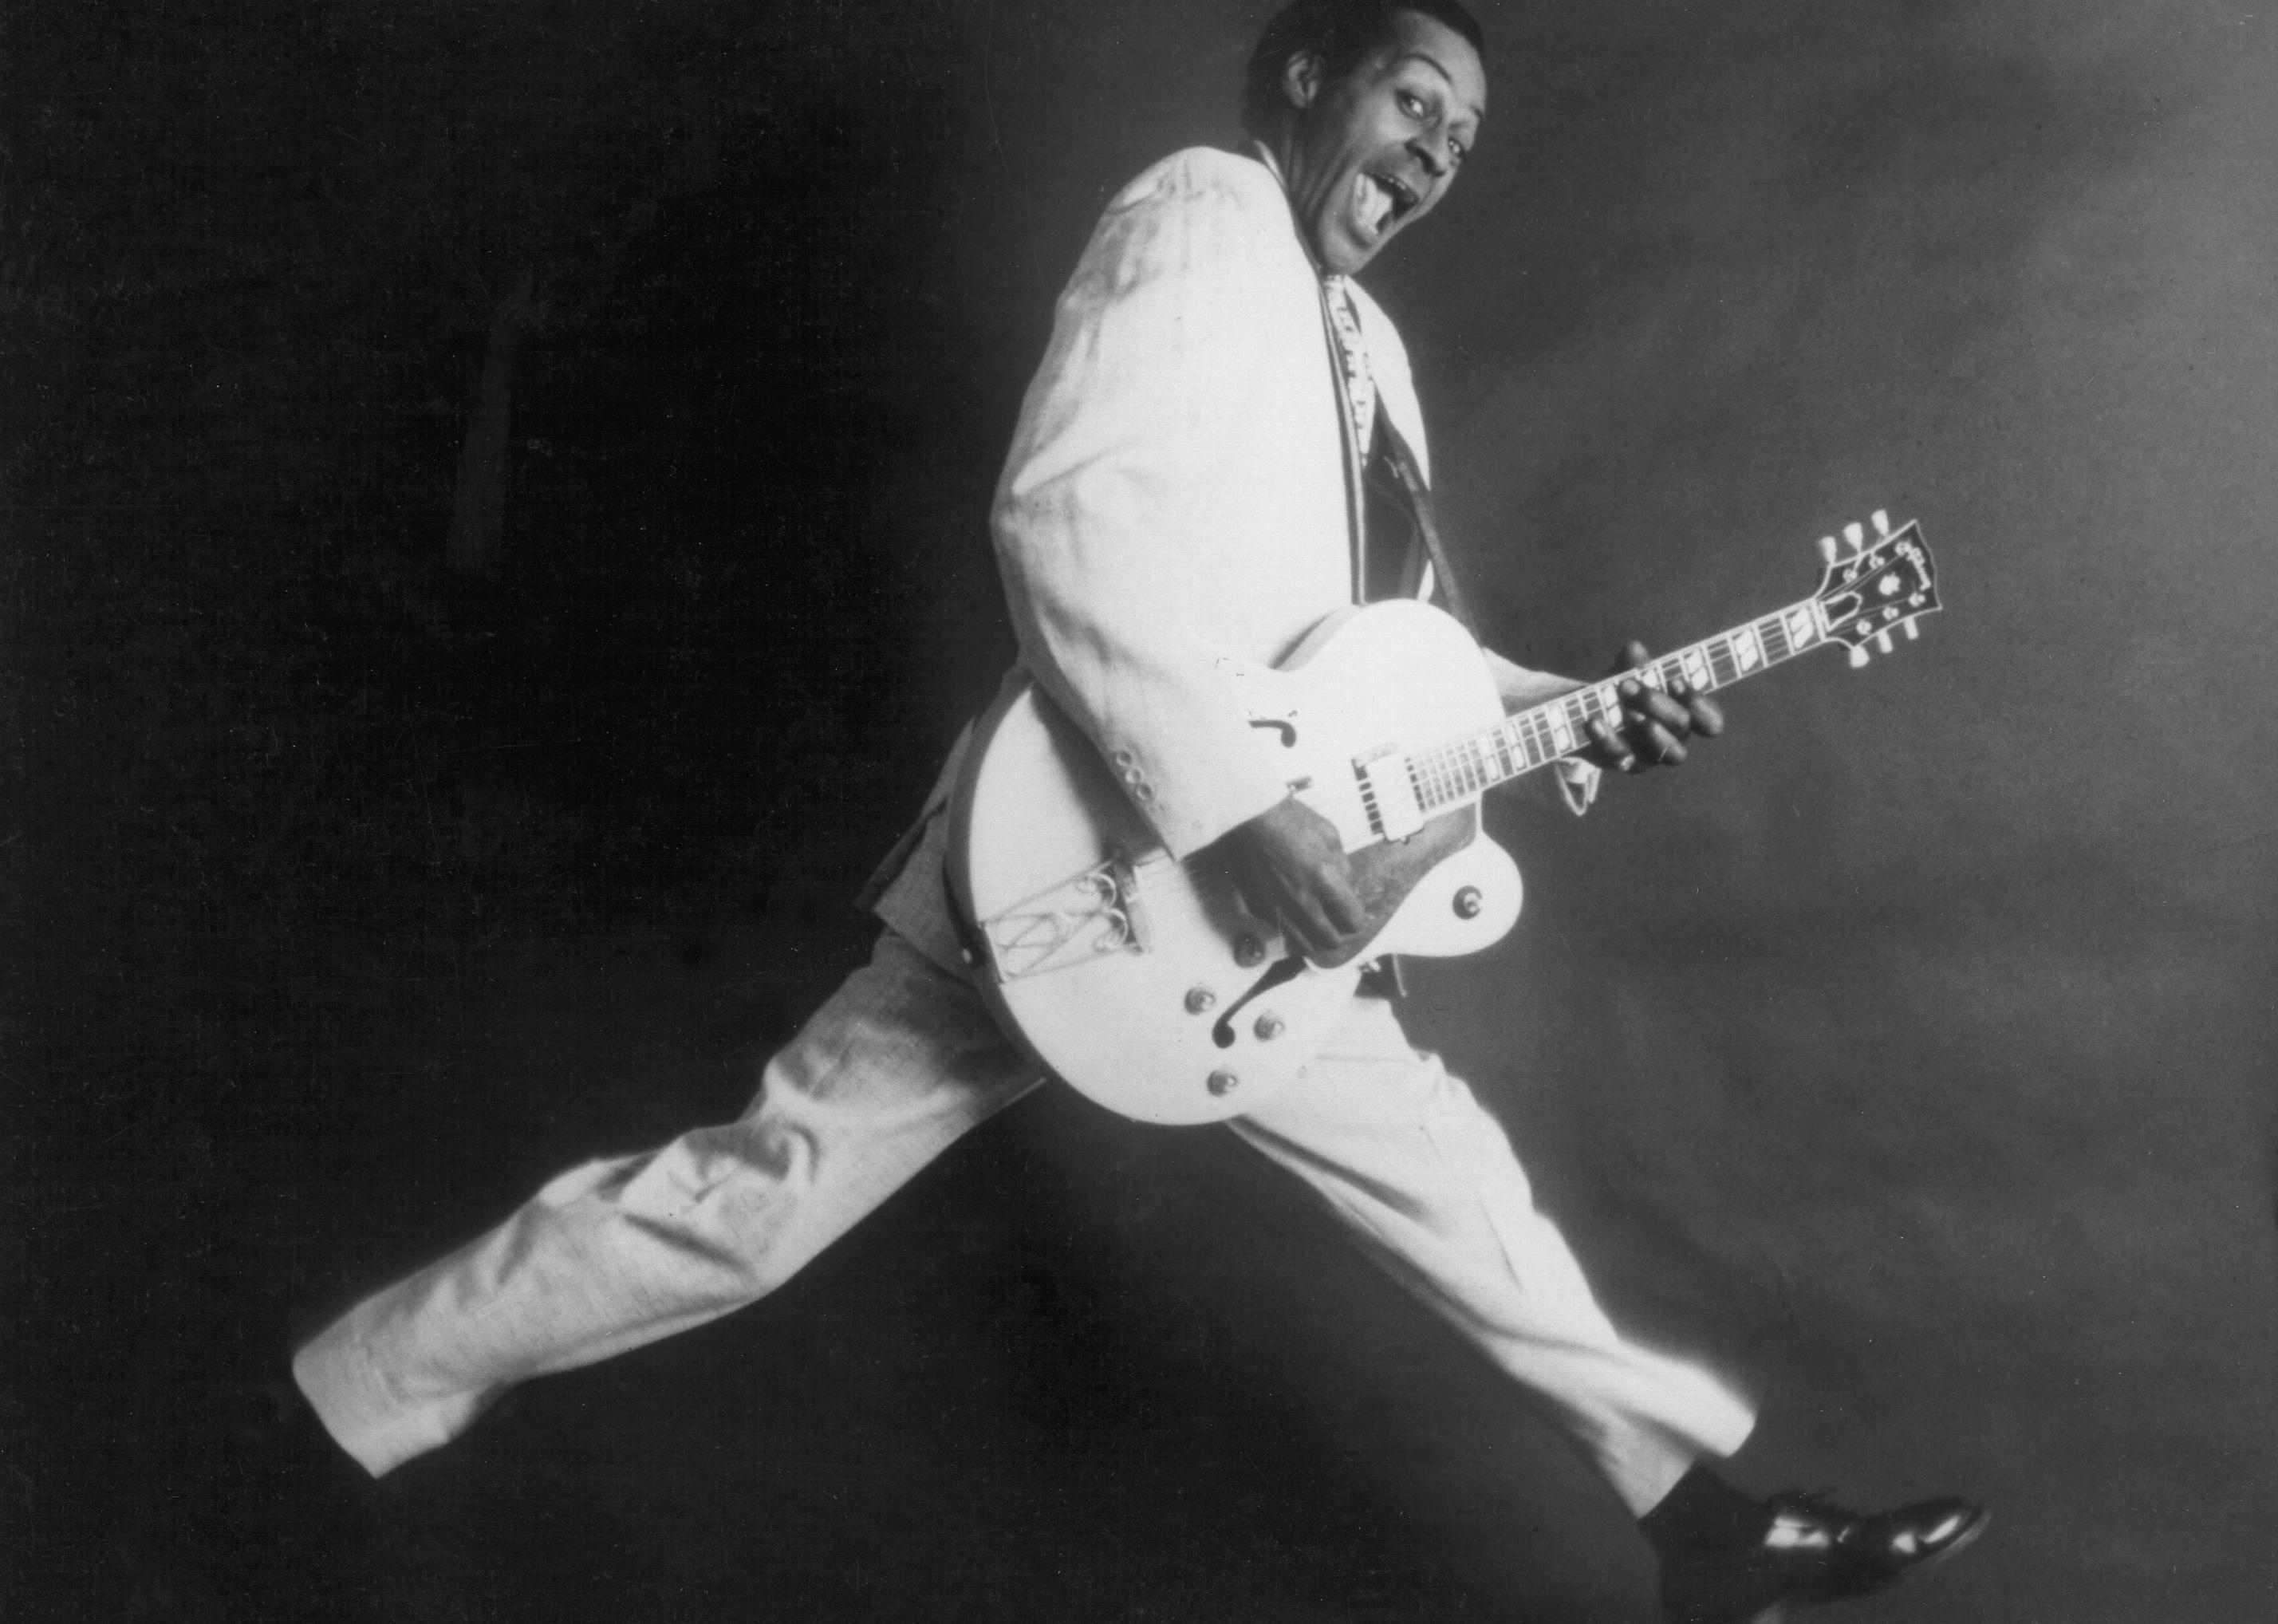 Chuck Berry dancing with a guitar in a white suit.